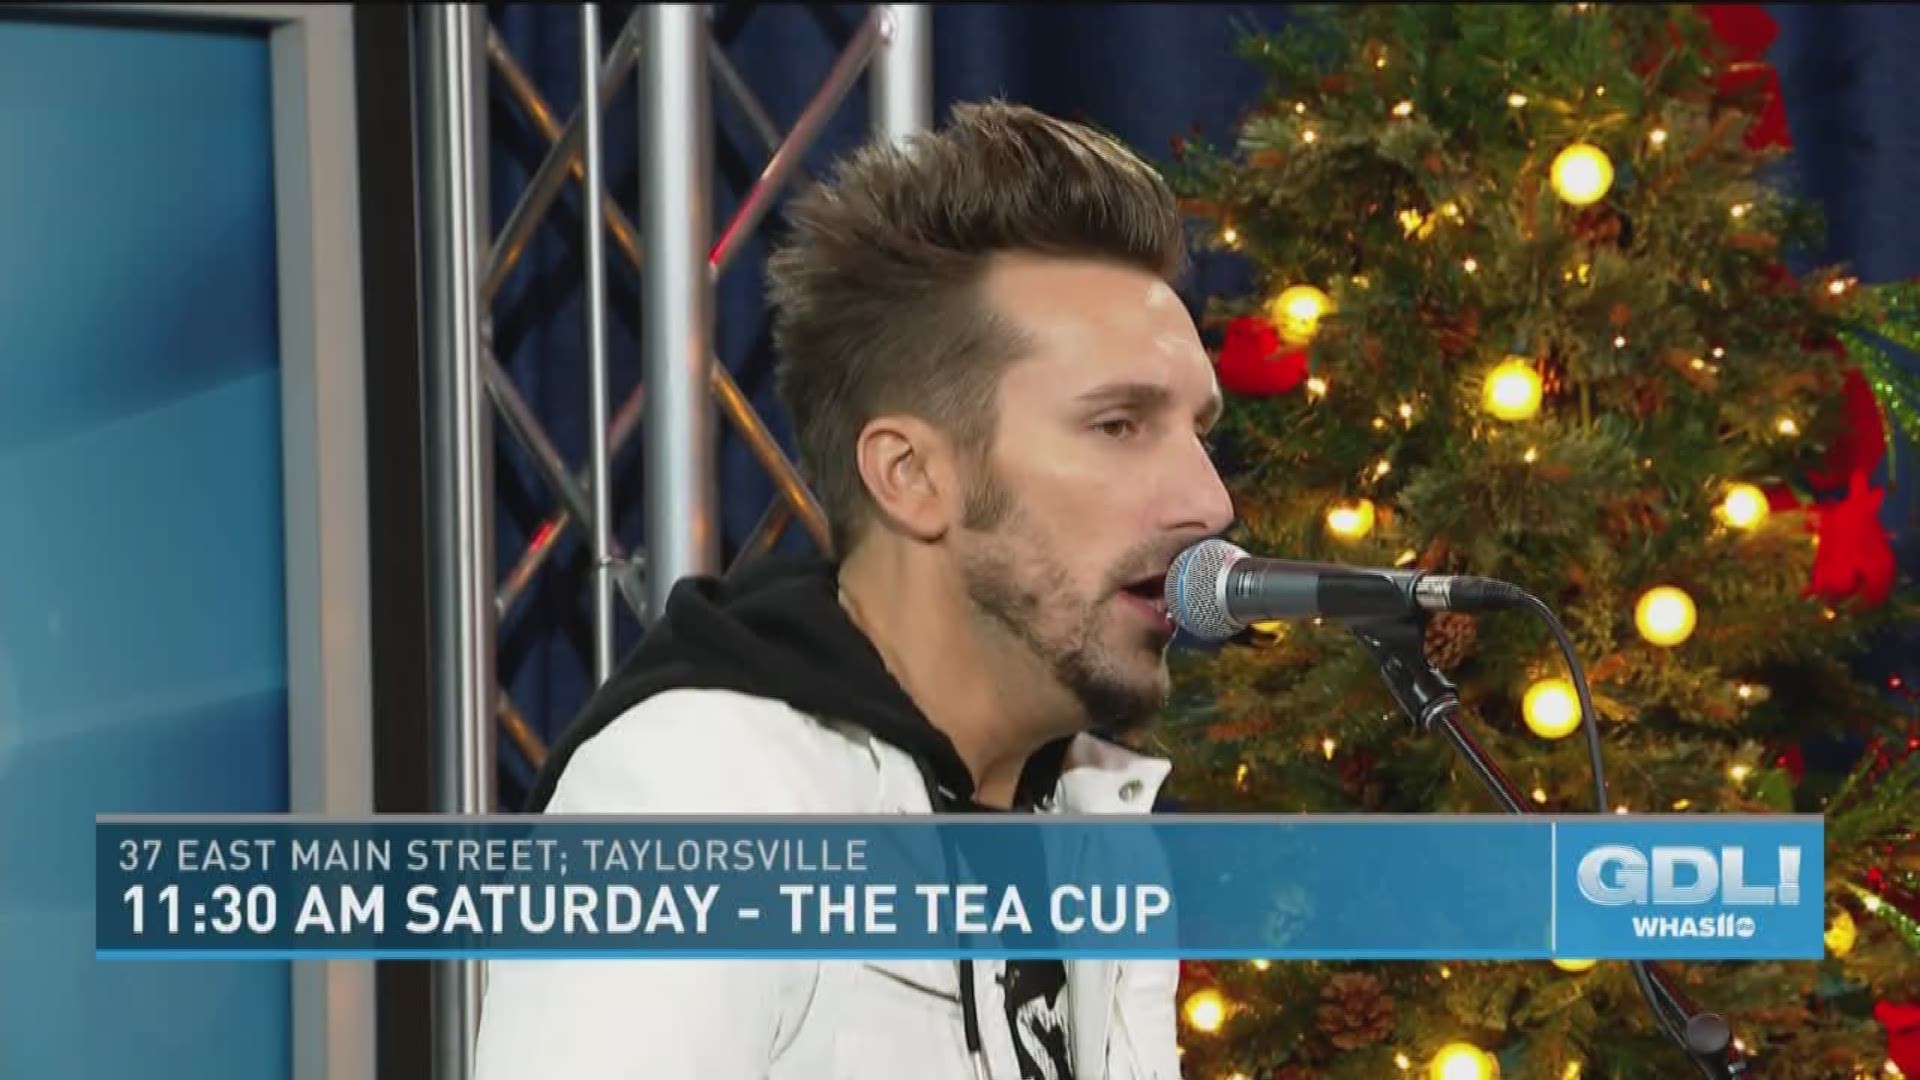 Musician JD Shelburne stopped by Great Day Live to perform a few songs.